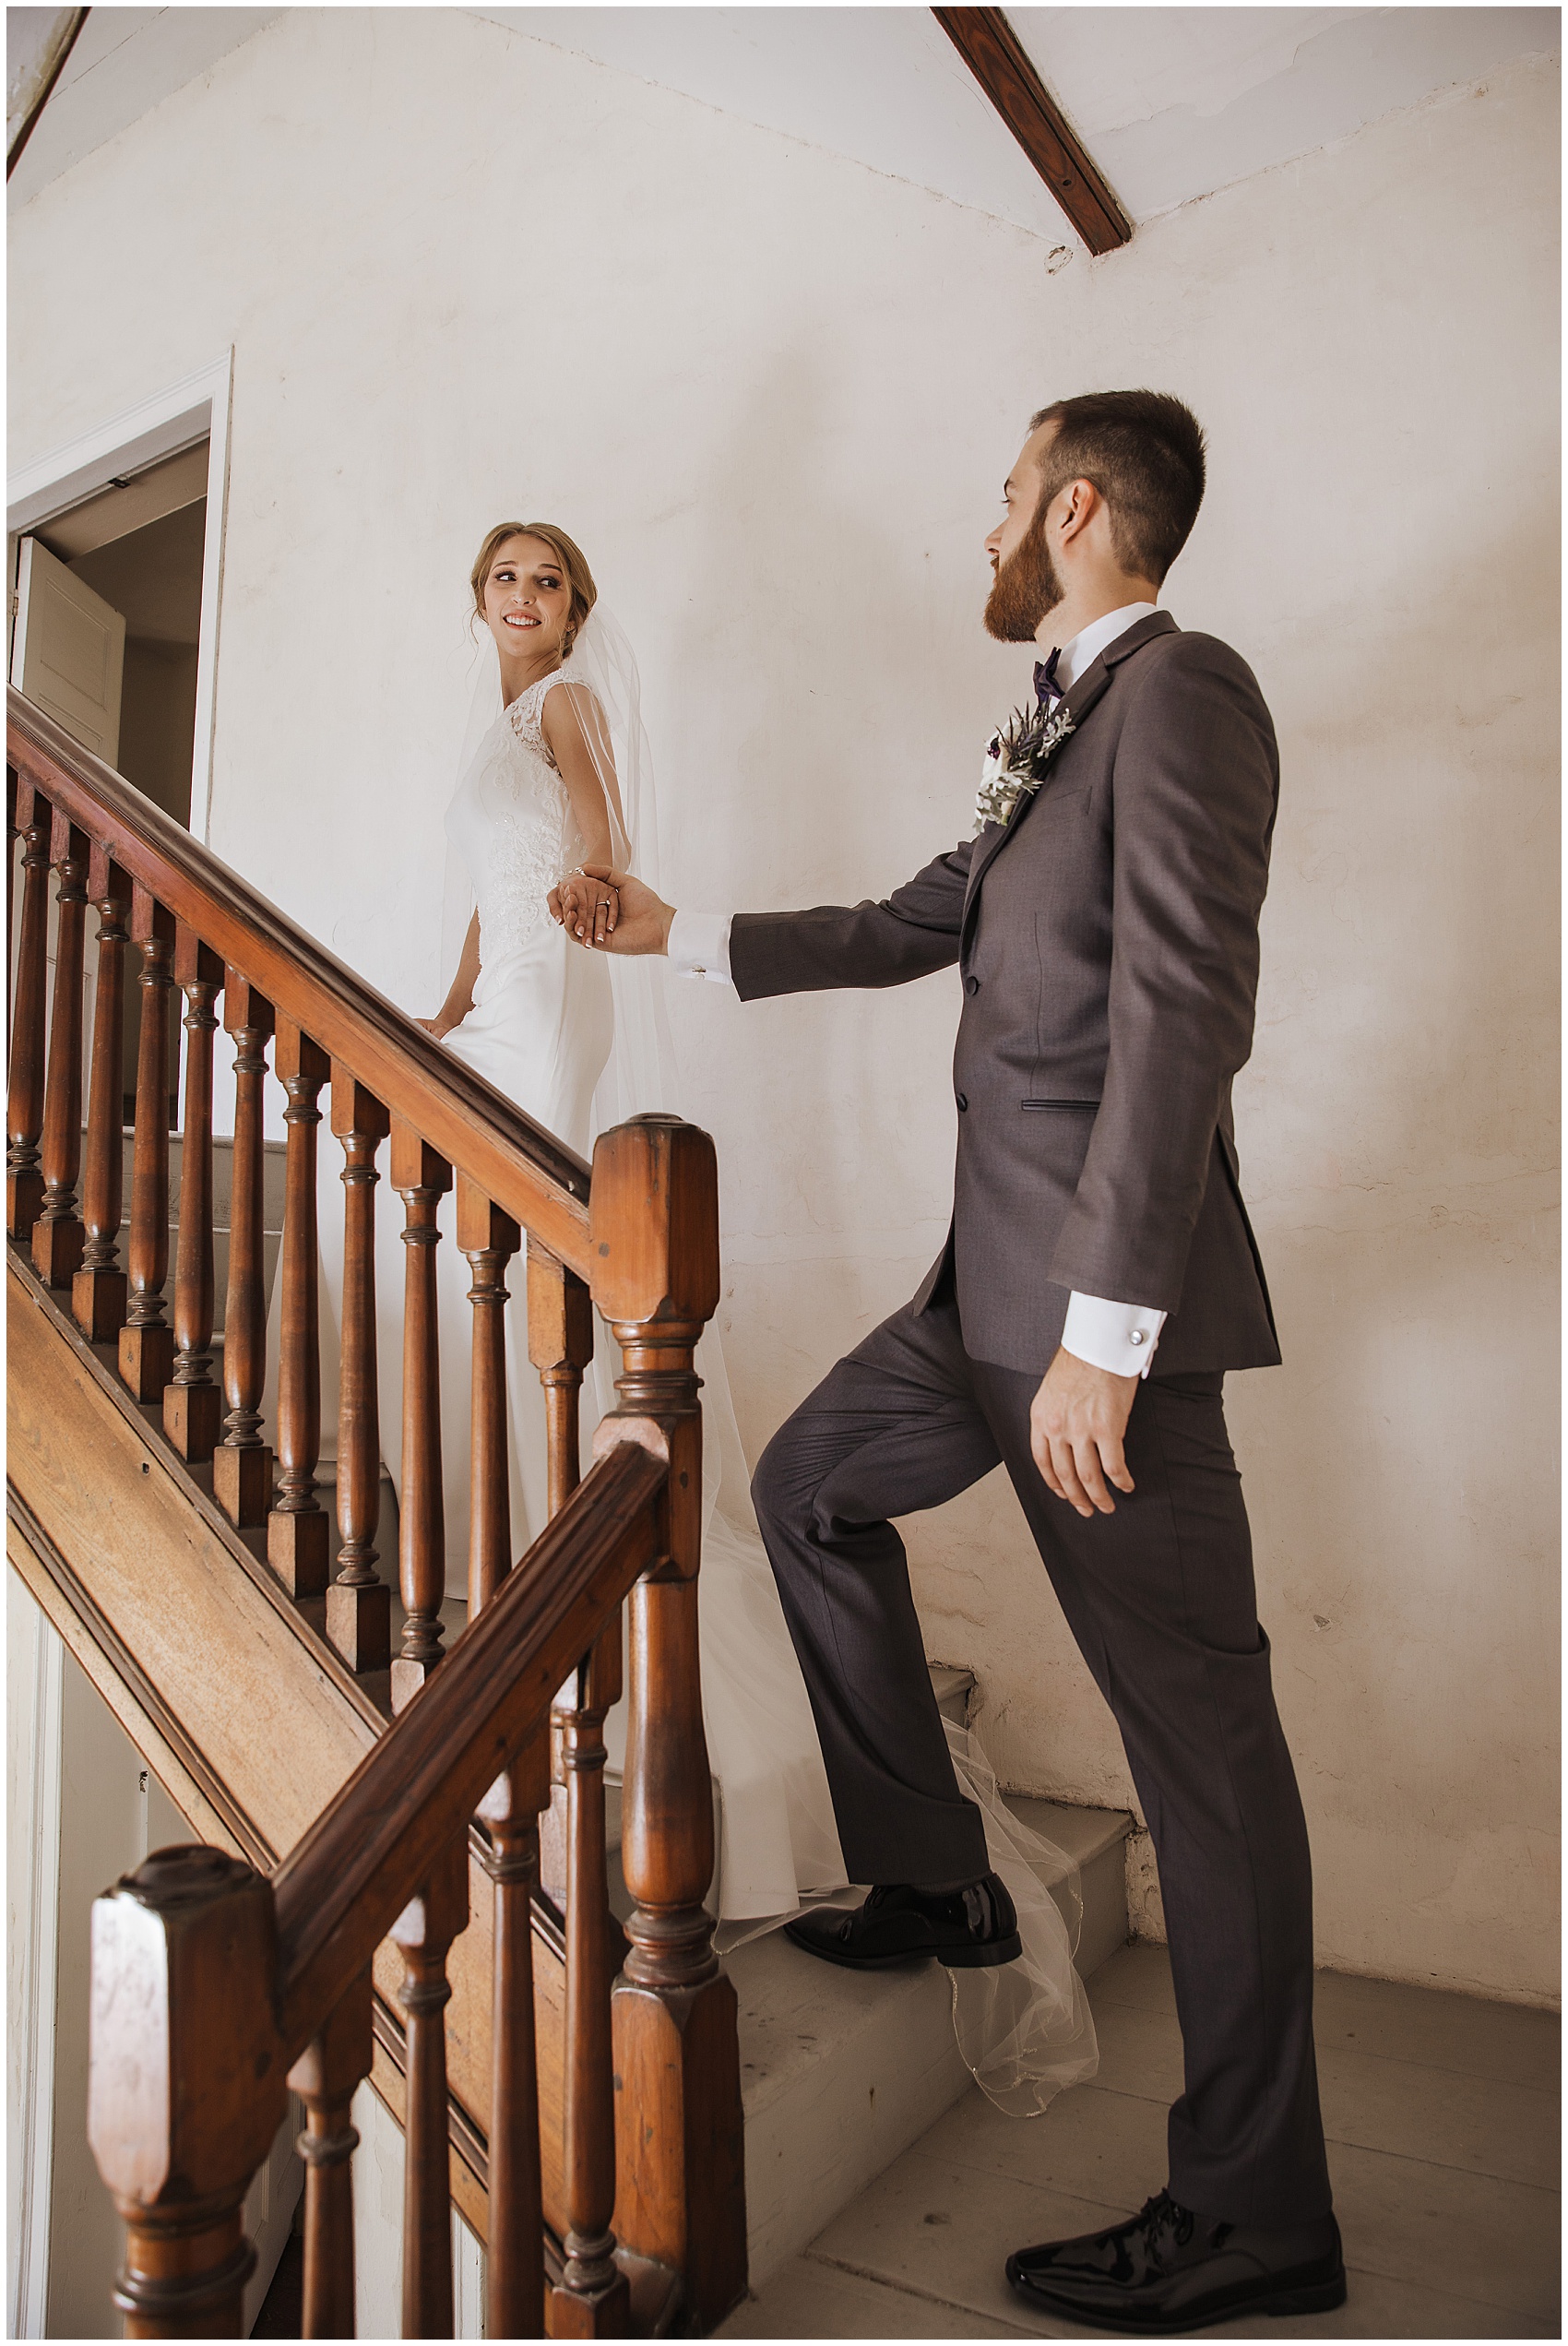 A bride leads her groom up a set of stairs by the hand